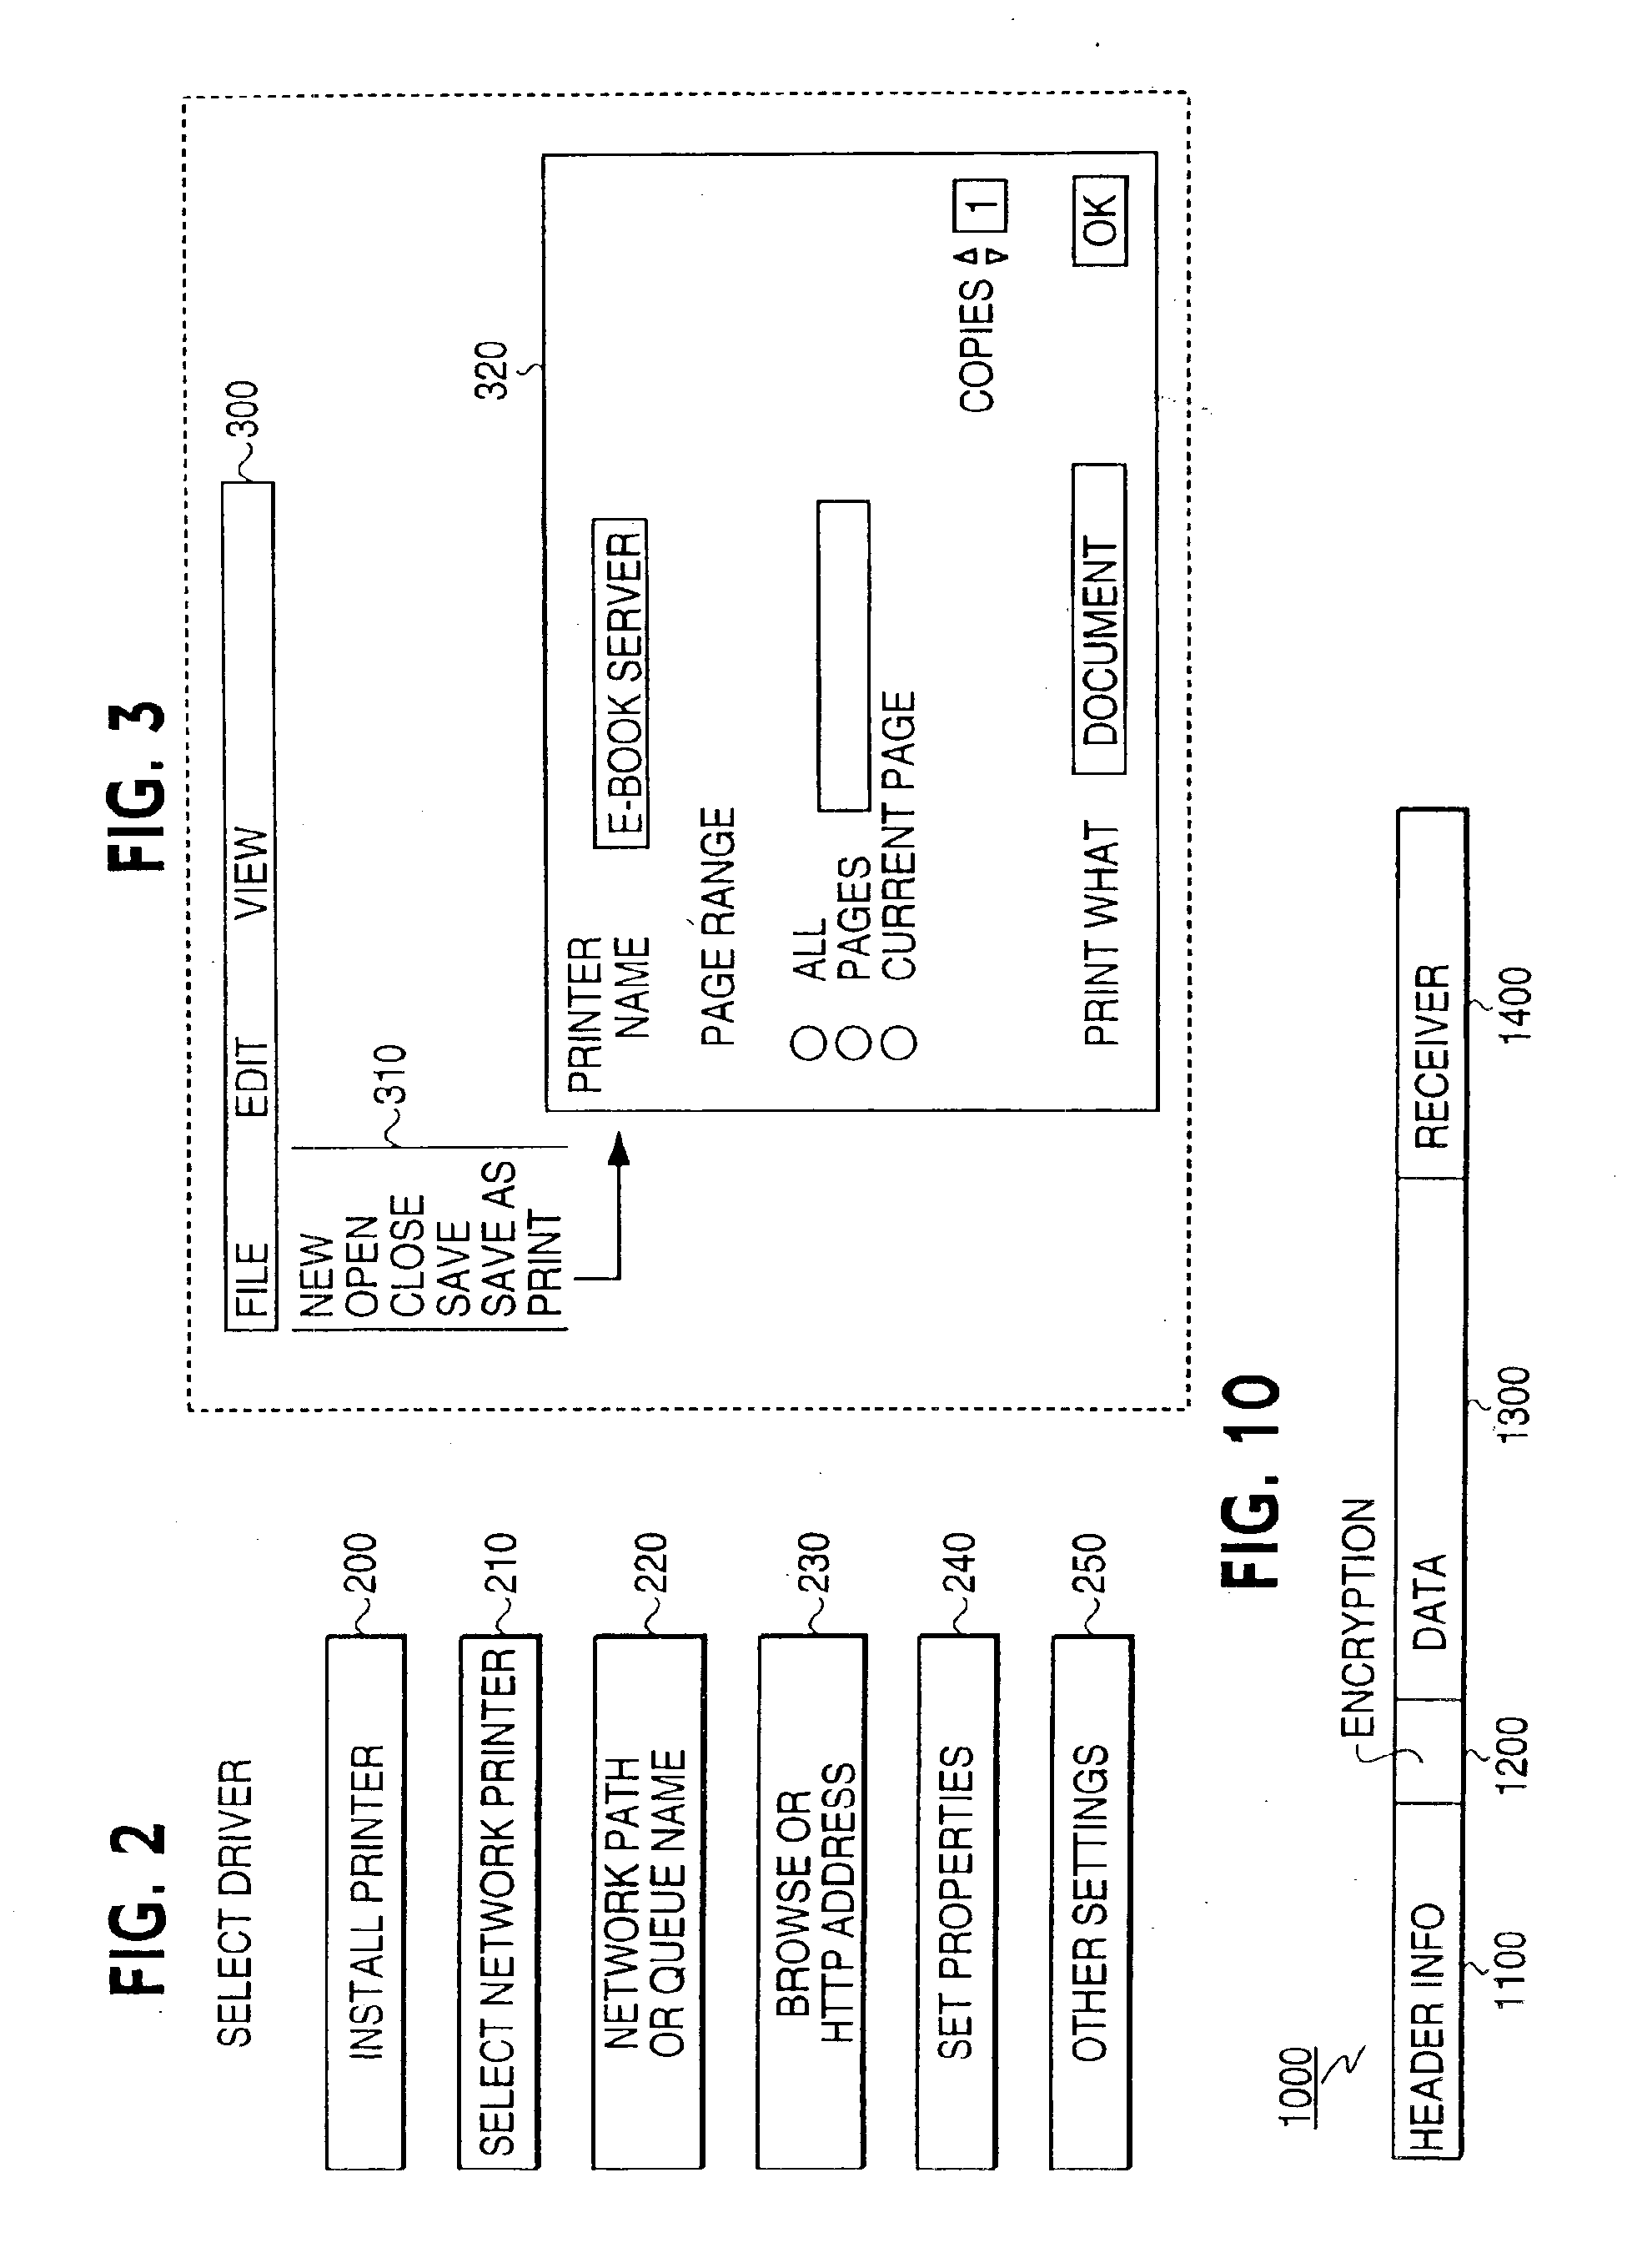 System and method for enhanced data access efficiency using an electronic book over data networks